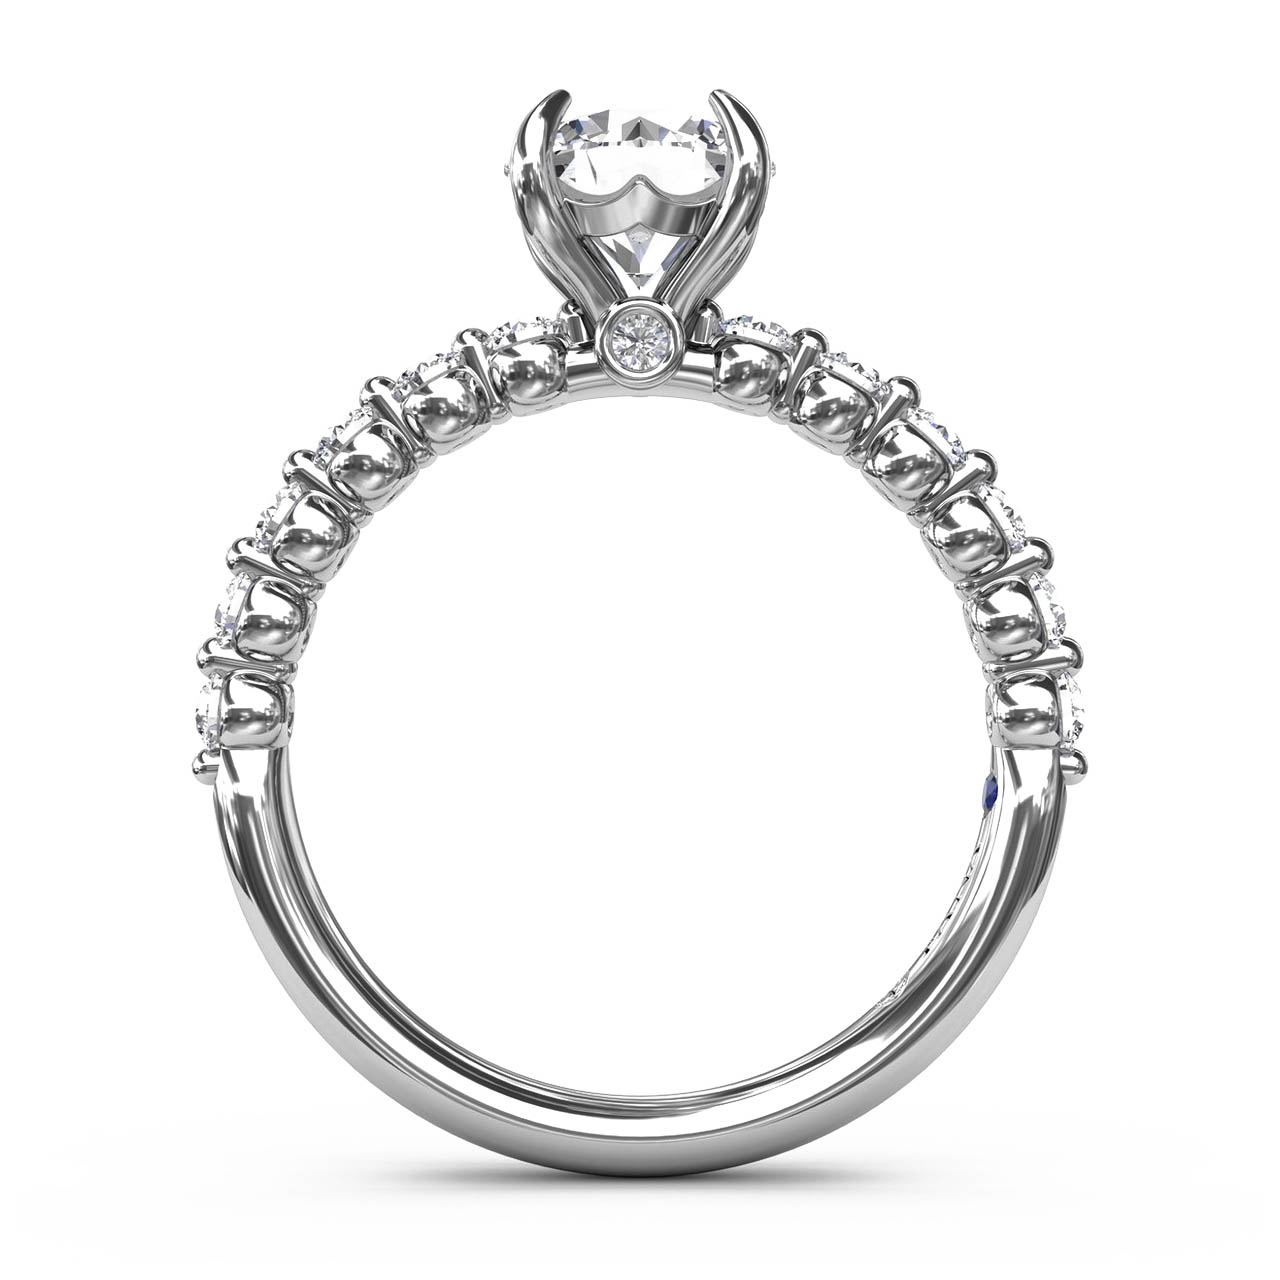 Fana Contemporary Round Diamond Solitaire Engagement Ring Setting in 14kt White Gold (3/8ct tw)